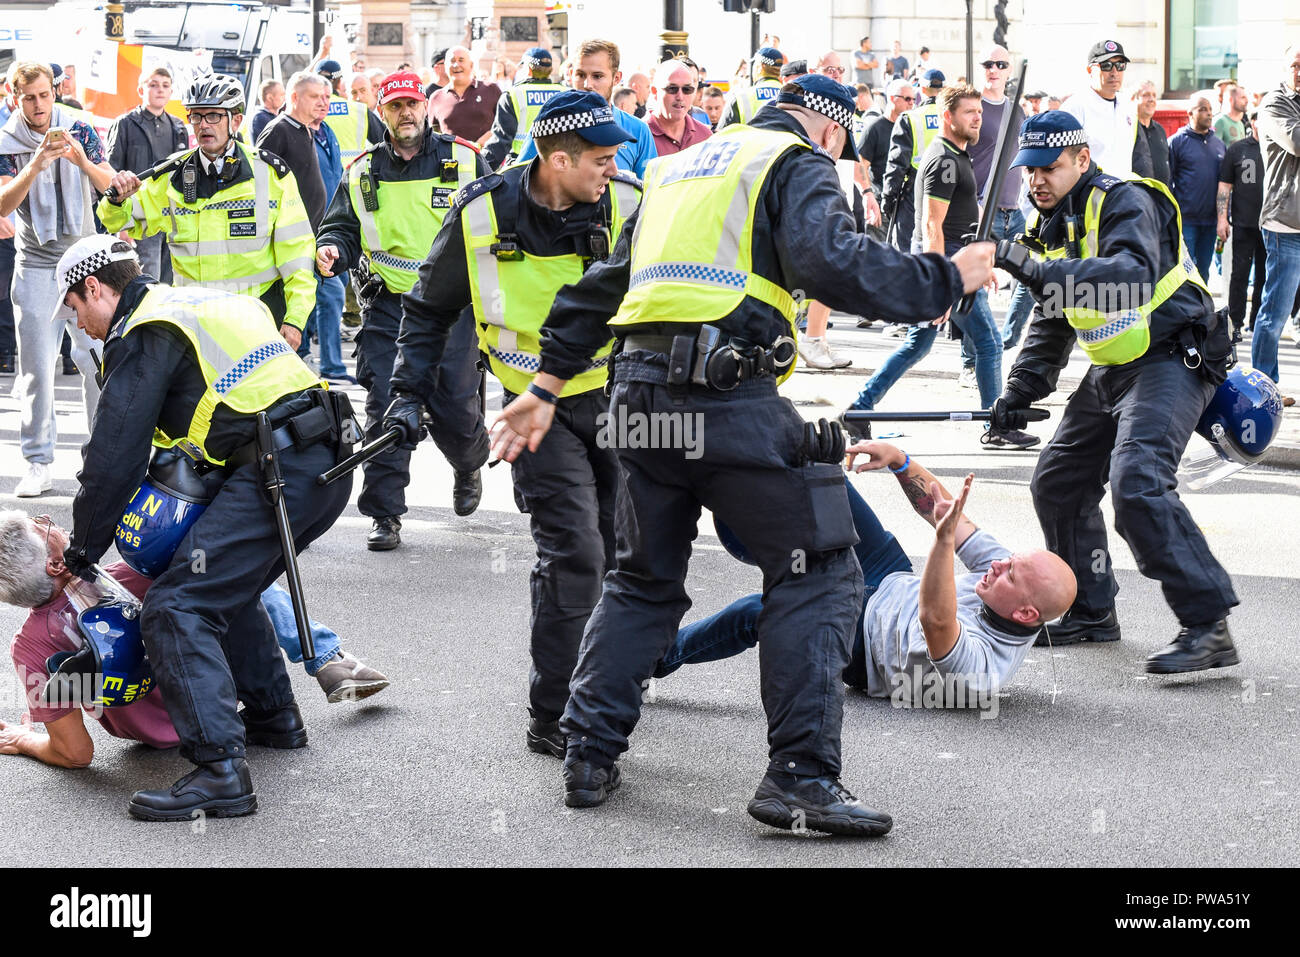 Democratic Football Lads Alliance DFLA members broke through police cordons during a protest march and fought with police. Police batons ready Stock Photo